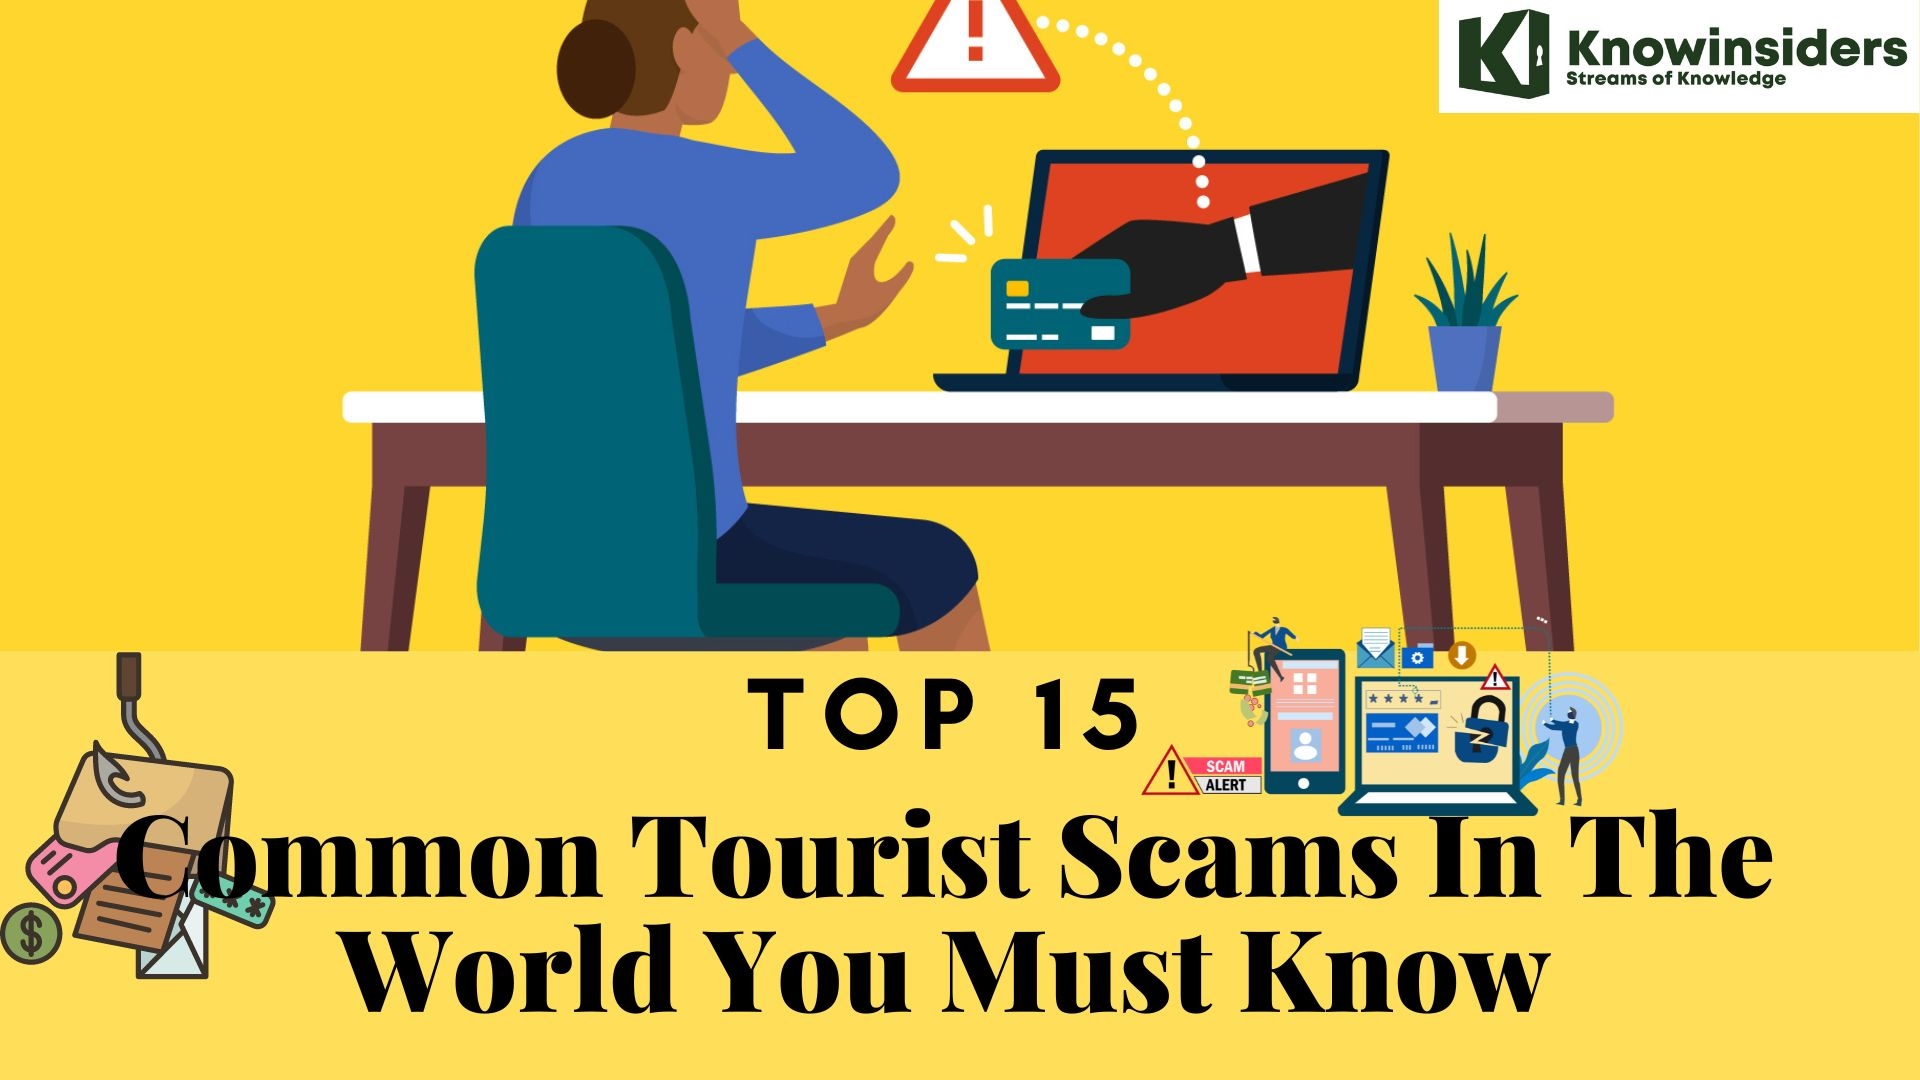  Top 15 Common Tourist Scams In The World You Must Know Knowinsiders.com 